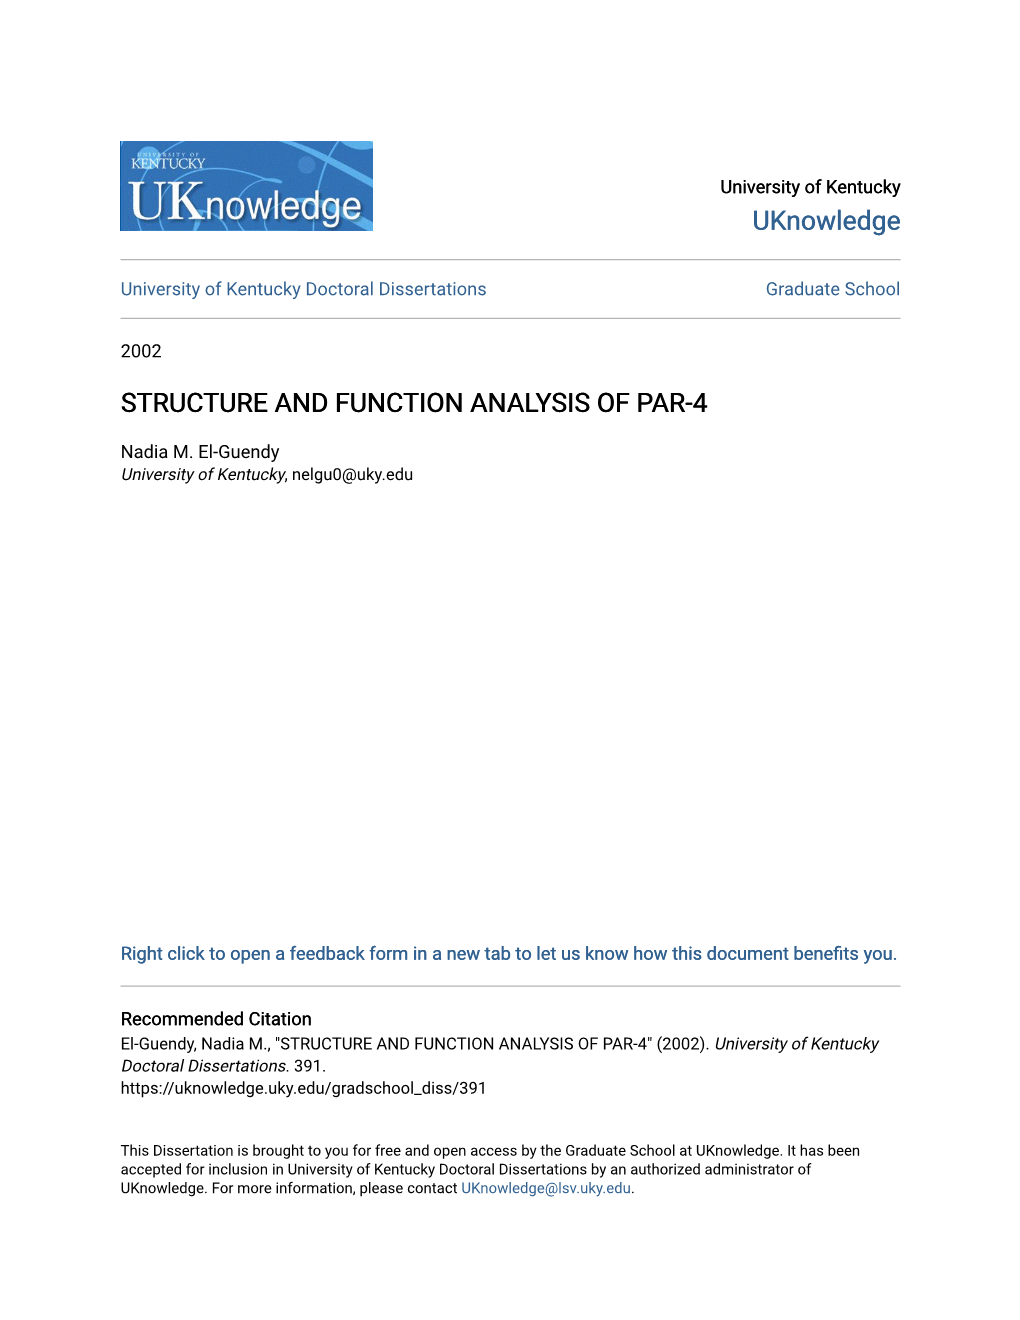 Structure and Function Analysis of Par-4